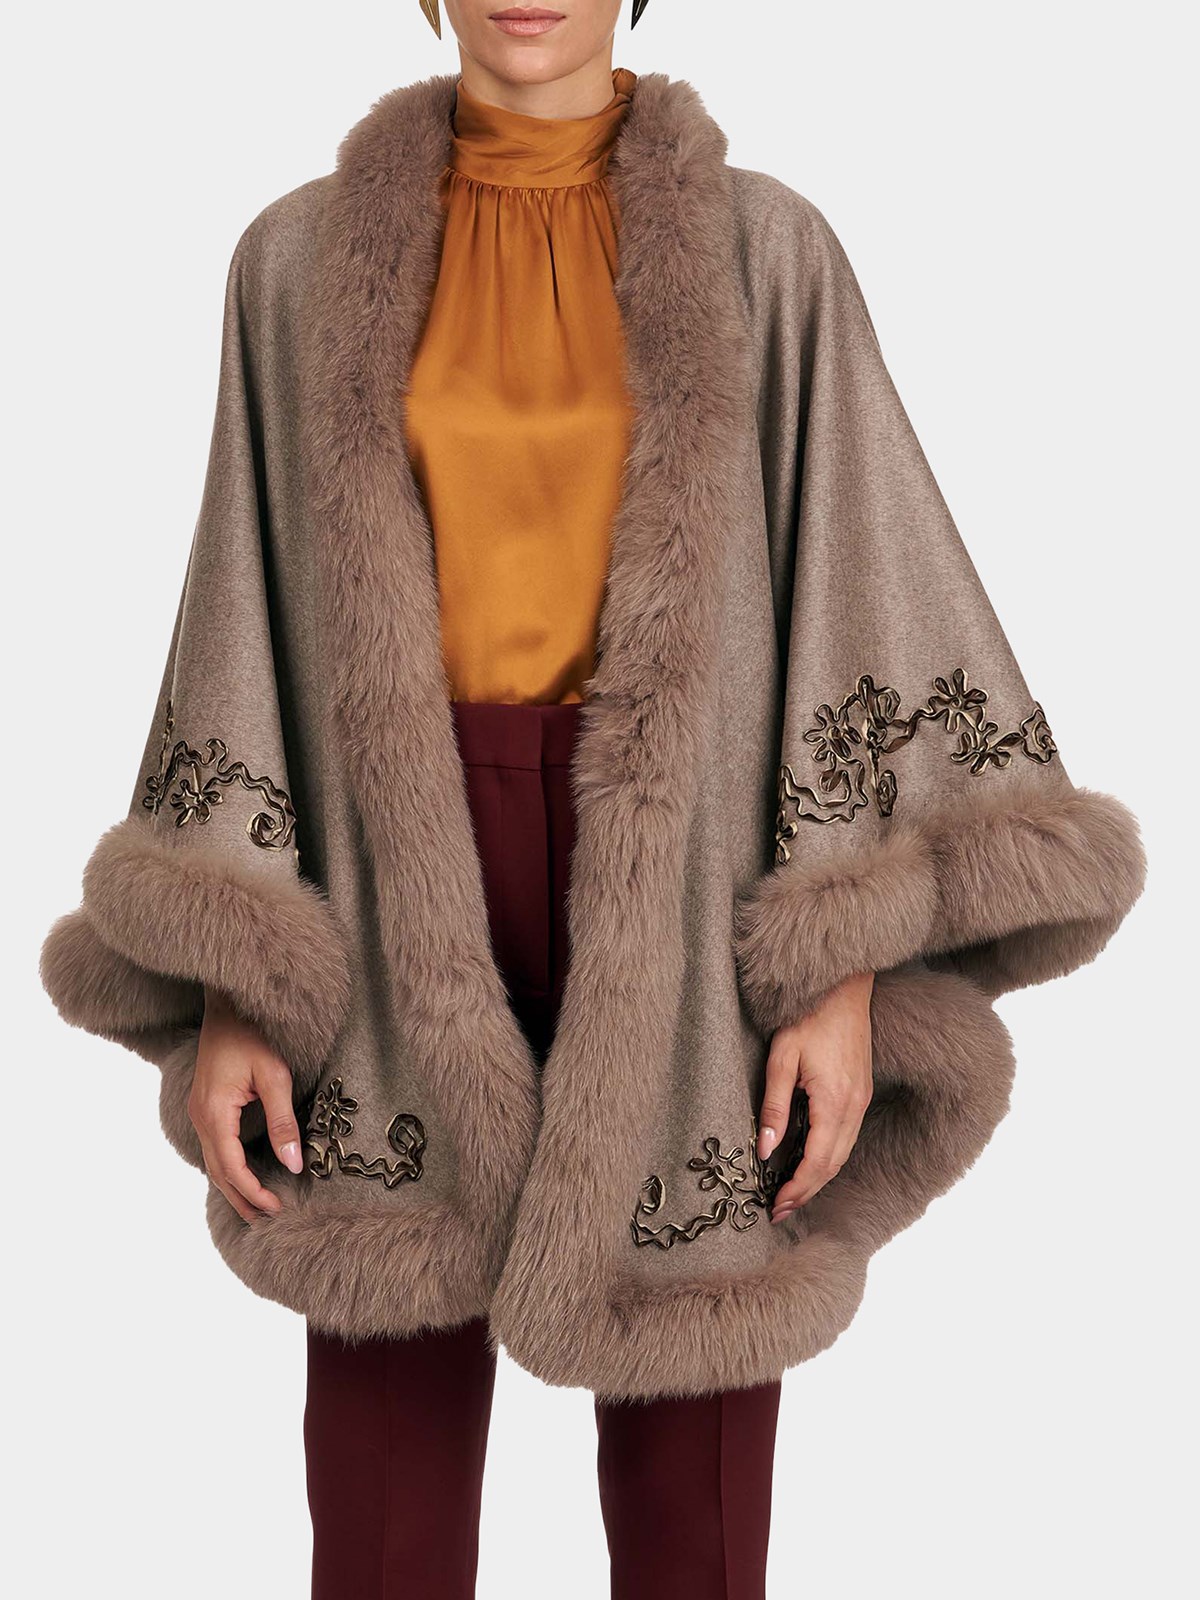 Woman's Gorski Sand Wool and Cashmere Cape with Fox Trim